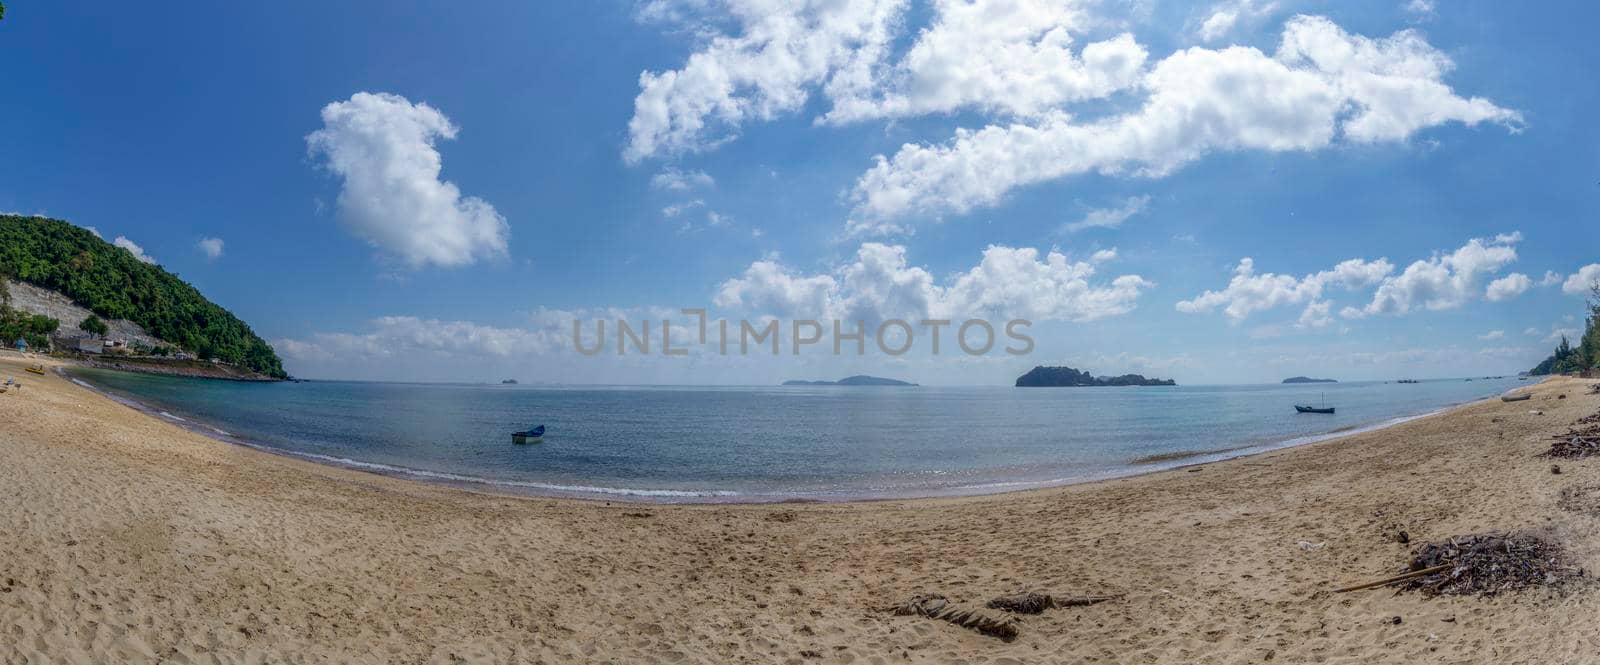 The sea and the beach at noon. The bright sky, the clouds are white.​Sea atmosphere at Sairee Beach, Chumphon Province, March 2019